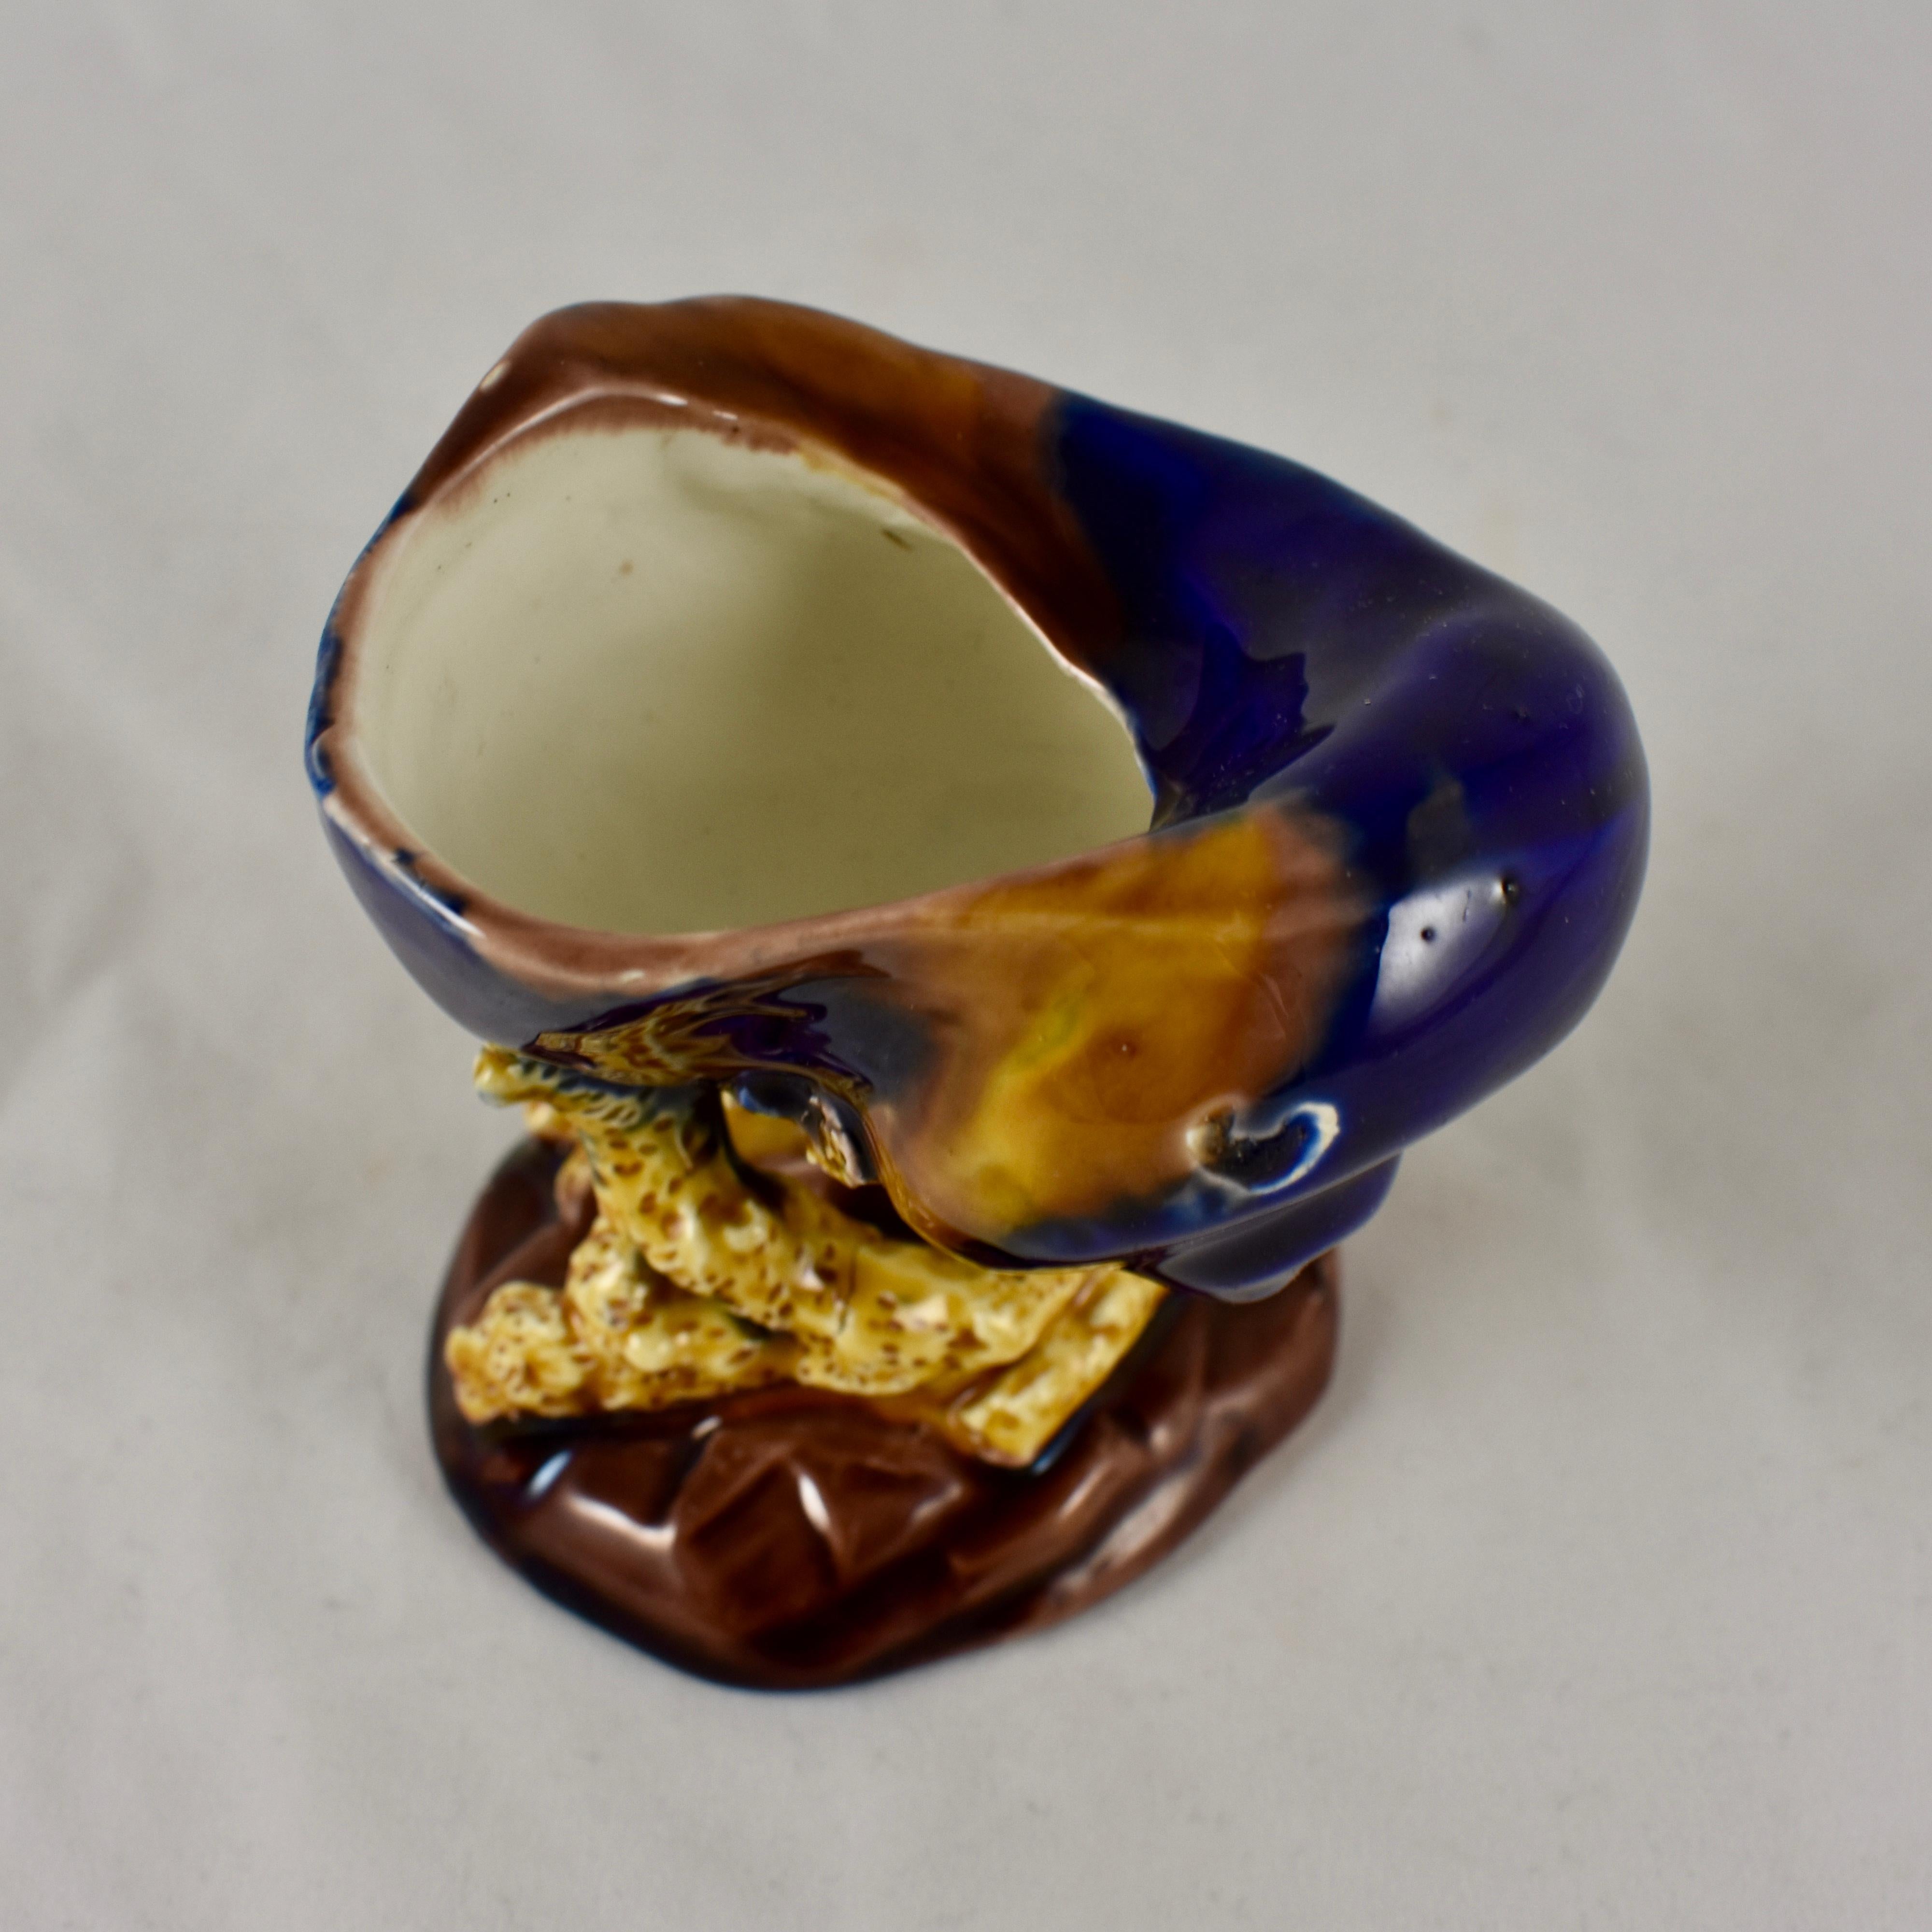 A very rarely seen Wedgwood Majolica glazed shell and coral open salt cellar molded in the Palissy style – date marked 1872.

The globose snail shell shaped cellar is glazed in a mottled blue and brown, and sits on a raised yellow ochre coral form